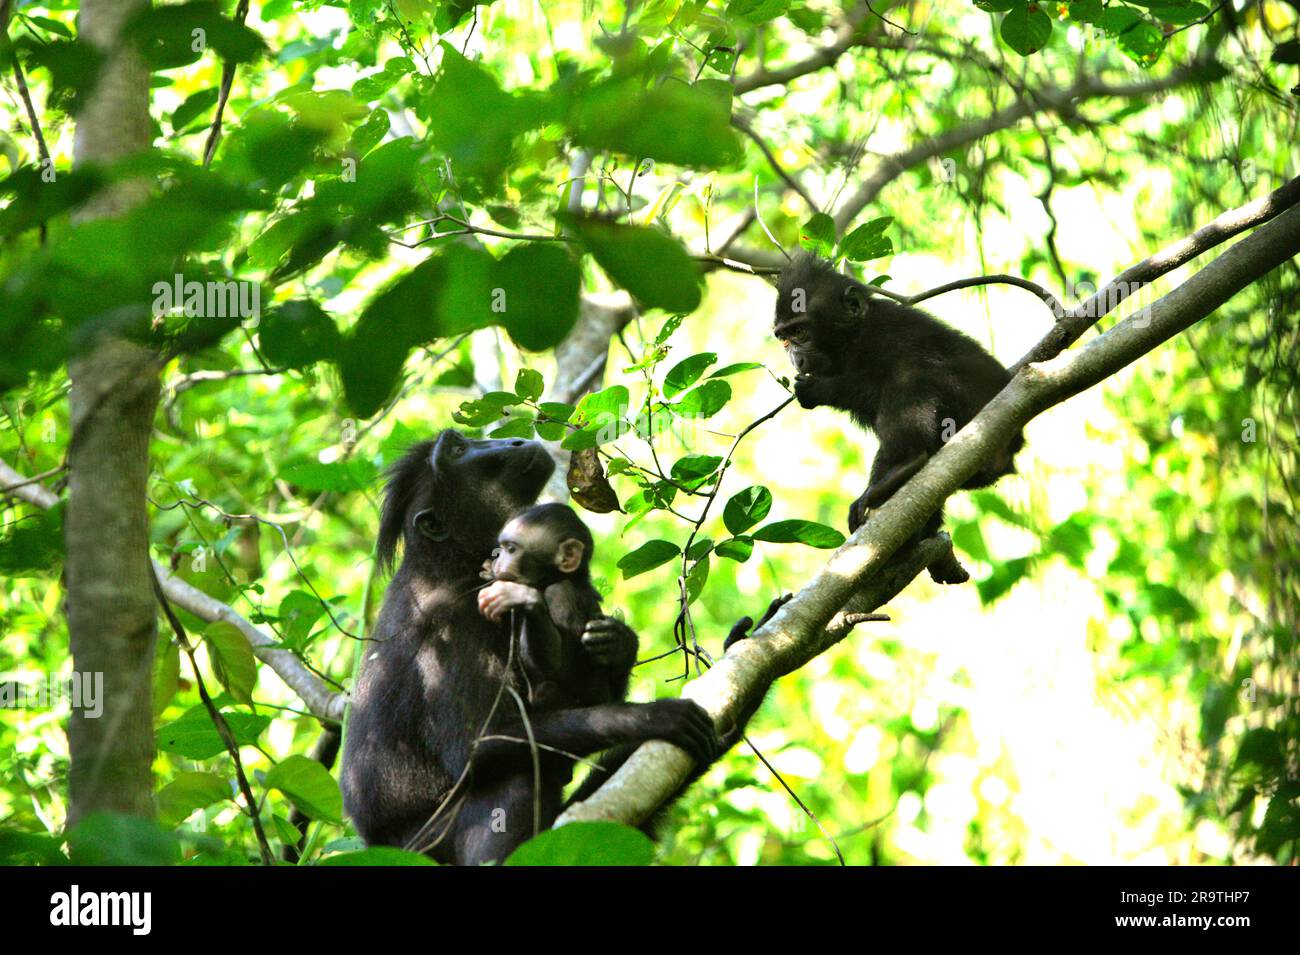 A crested macaque (Macaque nigra) female takes care an infant and a juvenile as they are foraging on a tree in Tangkoko Nature Reserve, North Sulawesi, Indonesia. Age between five months and one year is the phase of a crested macaque's life where infant mortality is the highest. Primate scientists from Macaca Nigra Project observed that 17 of the 78 infants (22%) disappeared in their first year of life. Eight of these 17 infants' dead bodies were found with large puncture wounds. Another primate scientist, J. P. Higham, added that 'infant disappearances increase after the arrival of a new alph Stock Photo